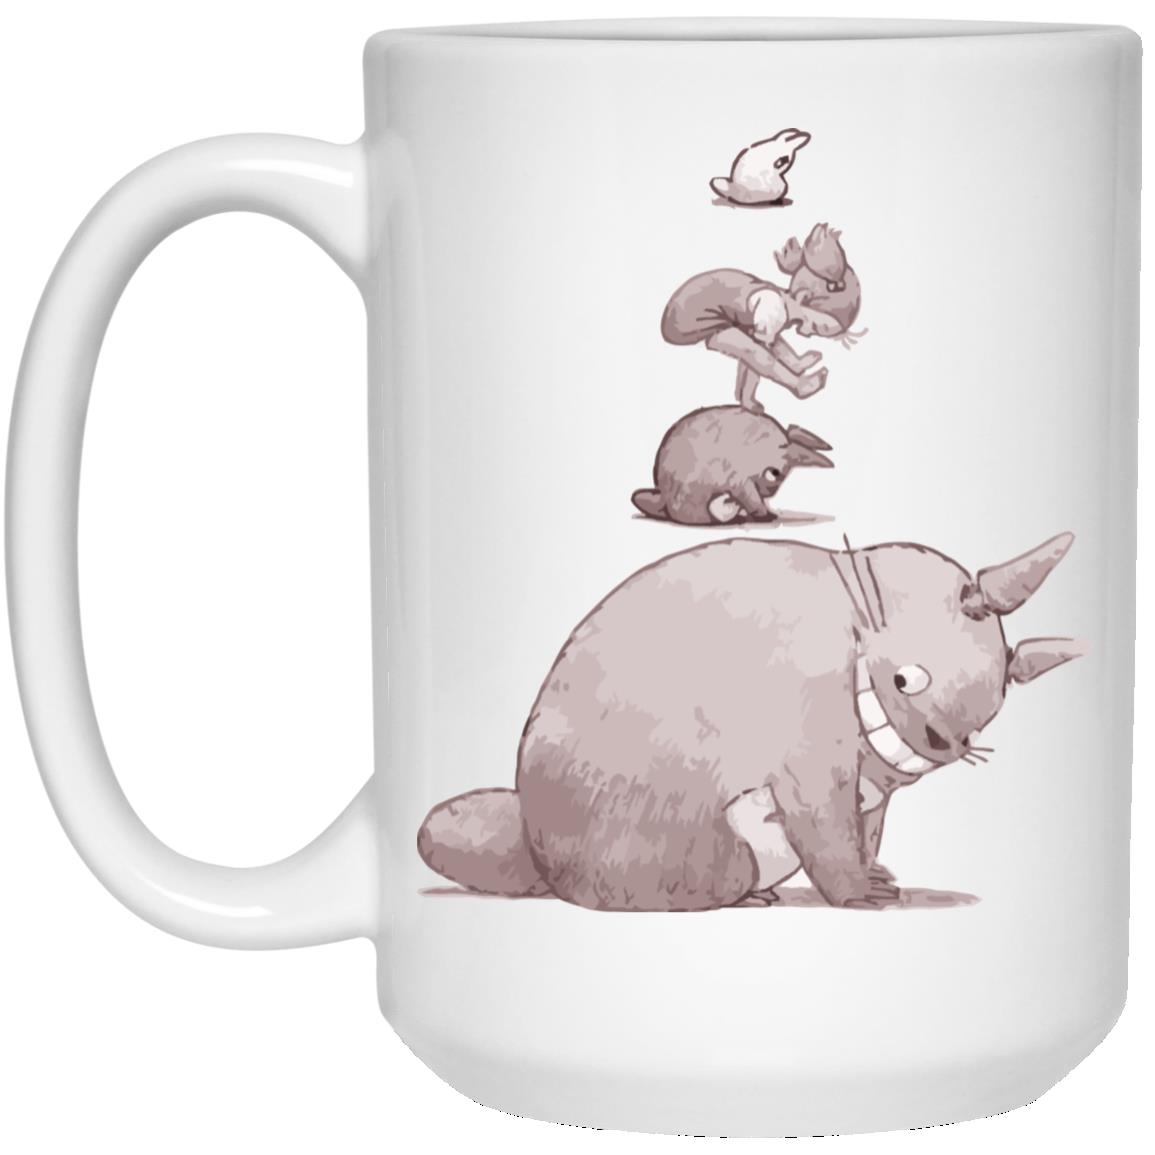 Totoro – Jump over the cow playing Mug